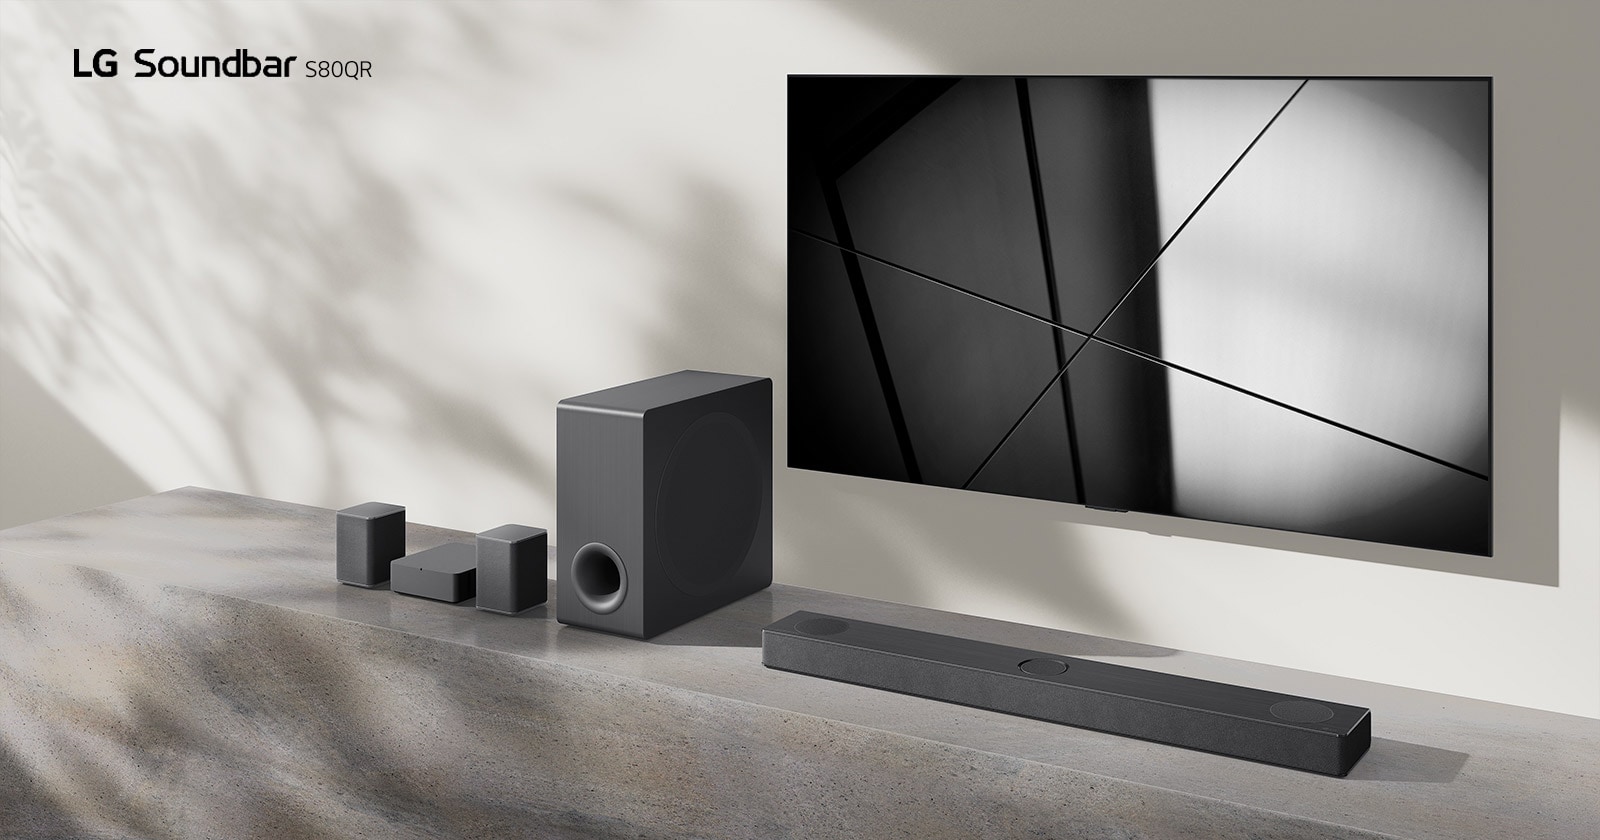 LG sound bar S80QR and LG TV are placed together in the living room. The TV is on, displaying a black and white image.